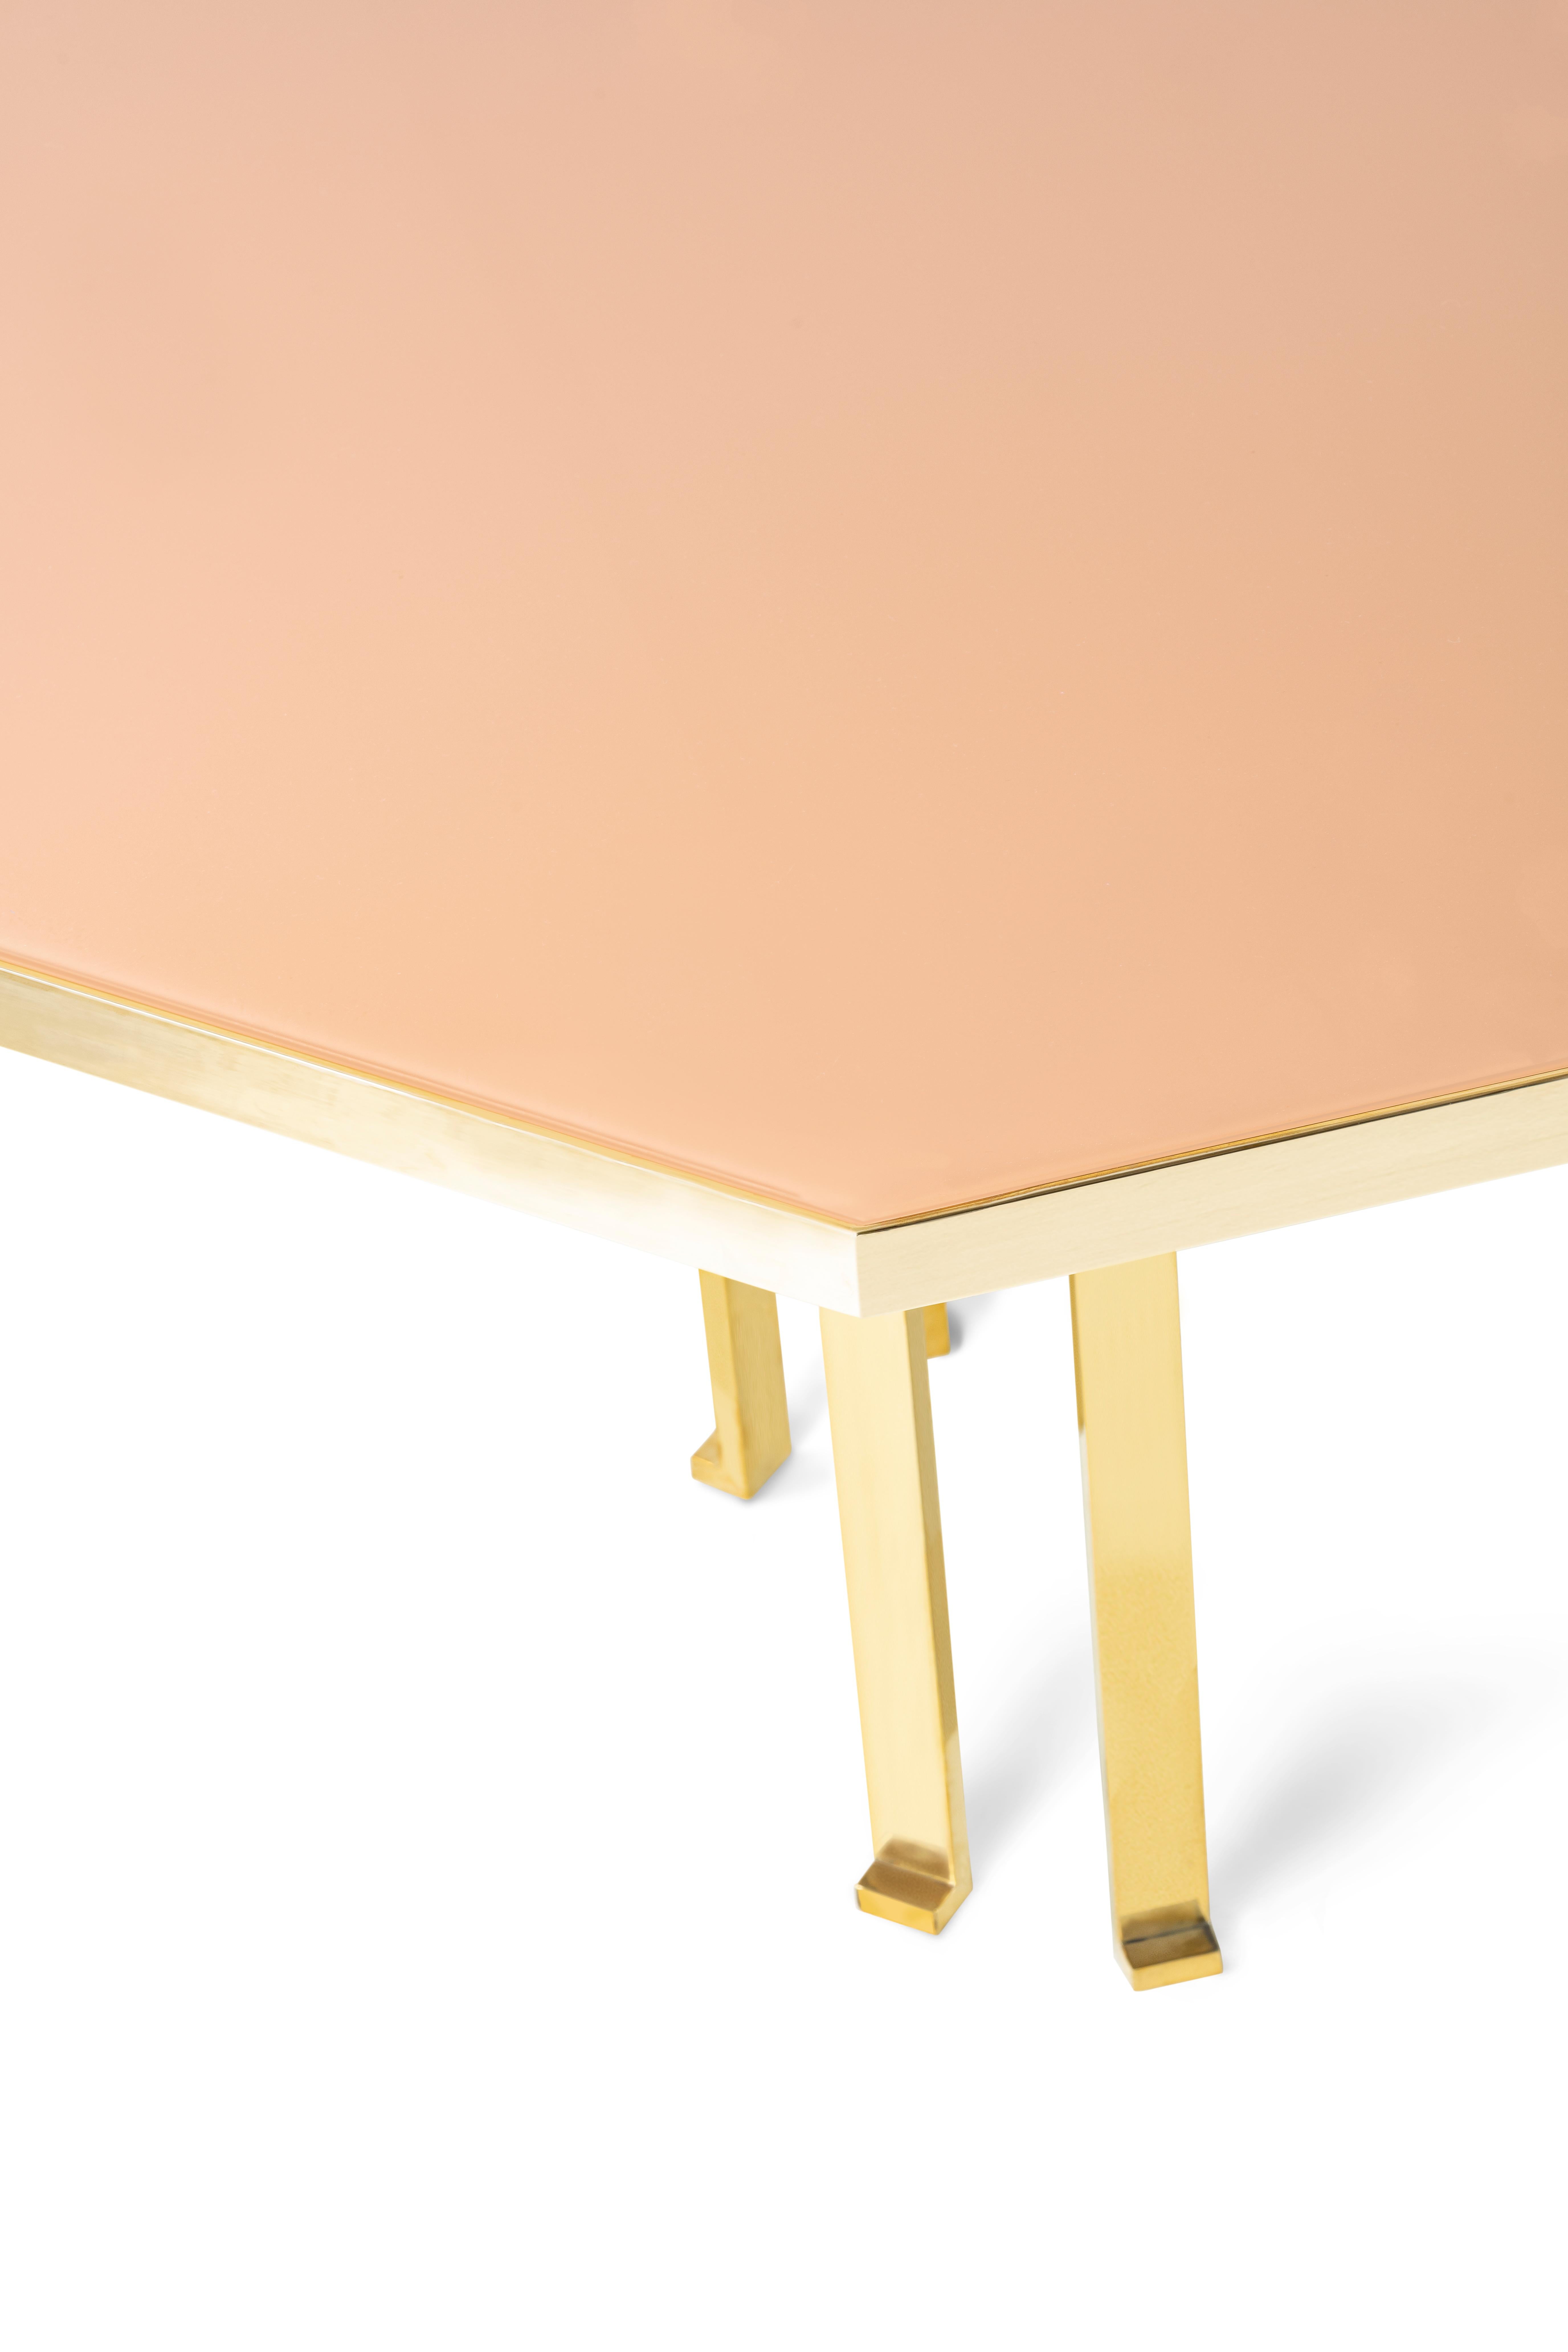 21st Century Filippo Feroldi Brass Table 280 Glass Top Various Colors For Sale 3